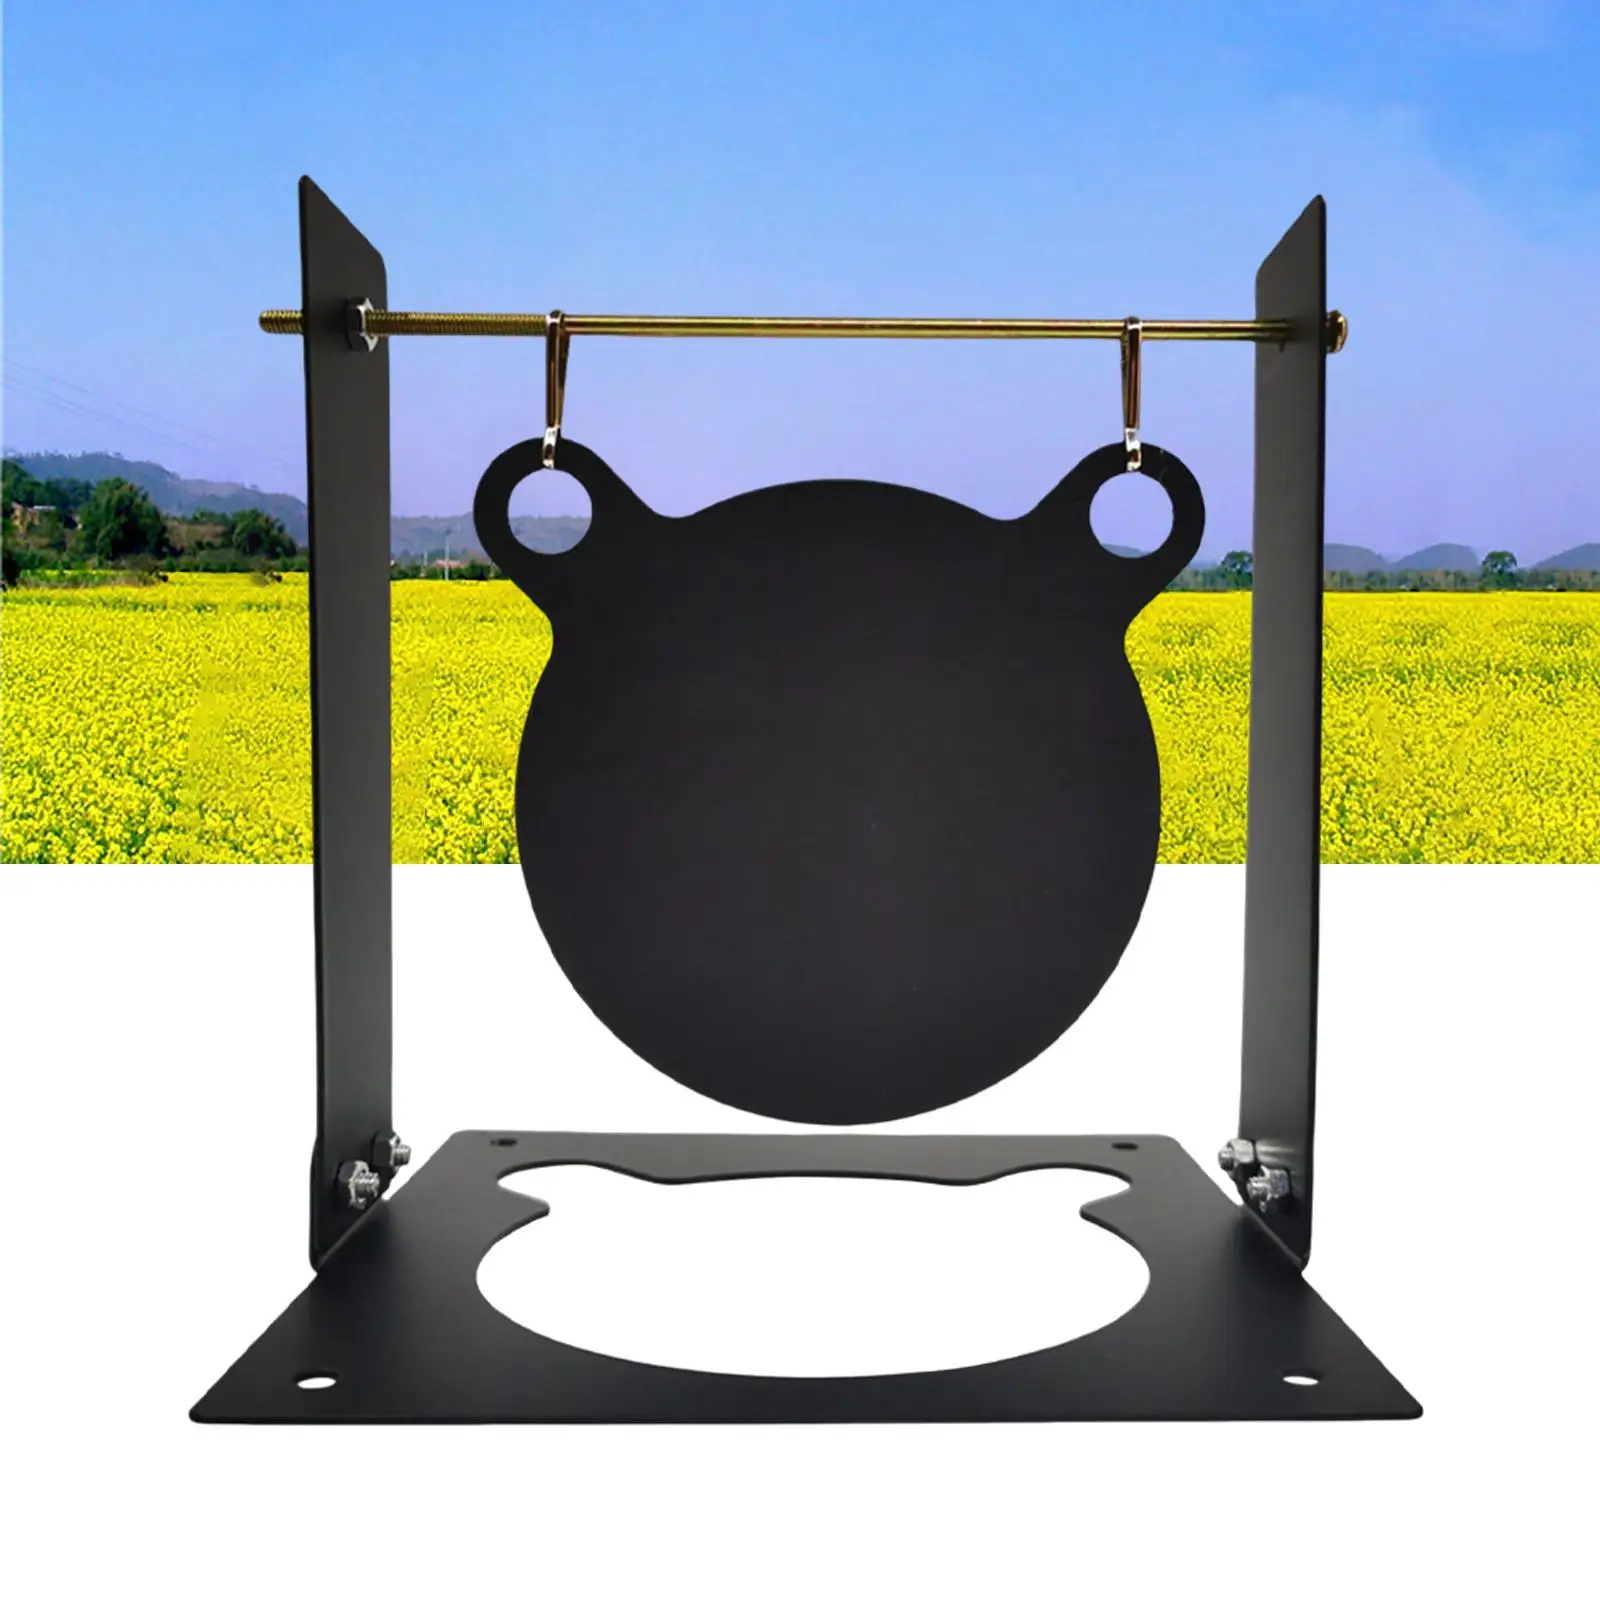 Portable Trainer Target Outdoor Sports Toy Target Hunting Training Target for Kids Boys Teens Adults Children